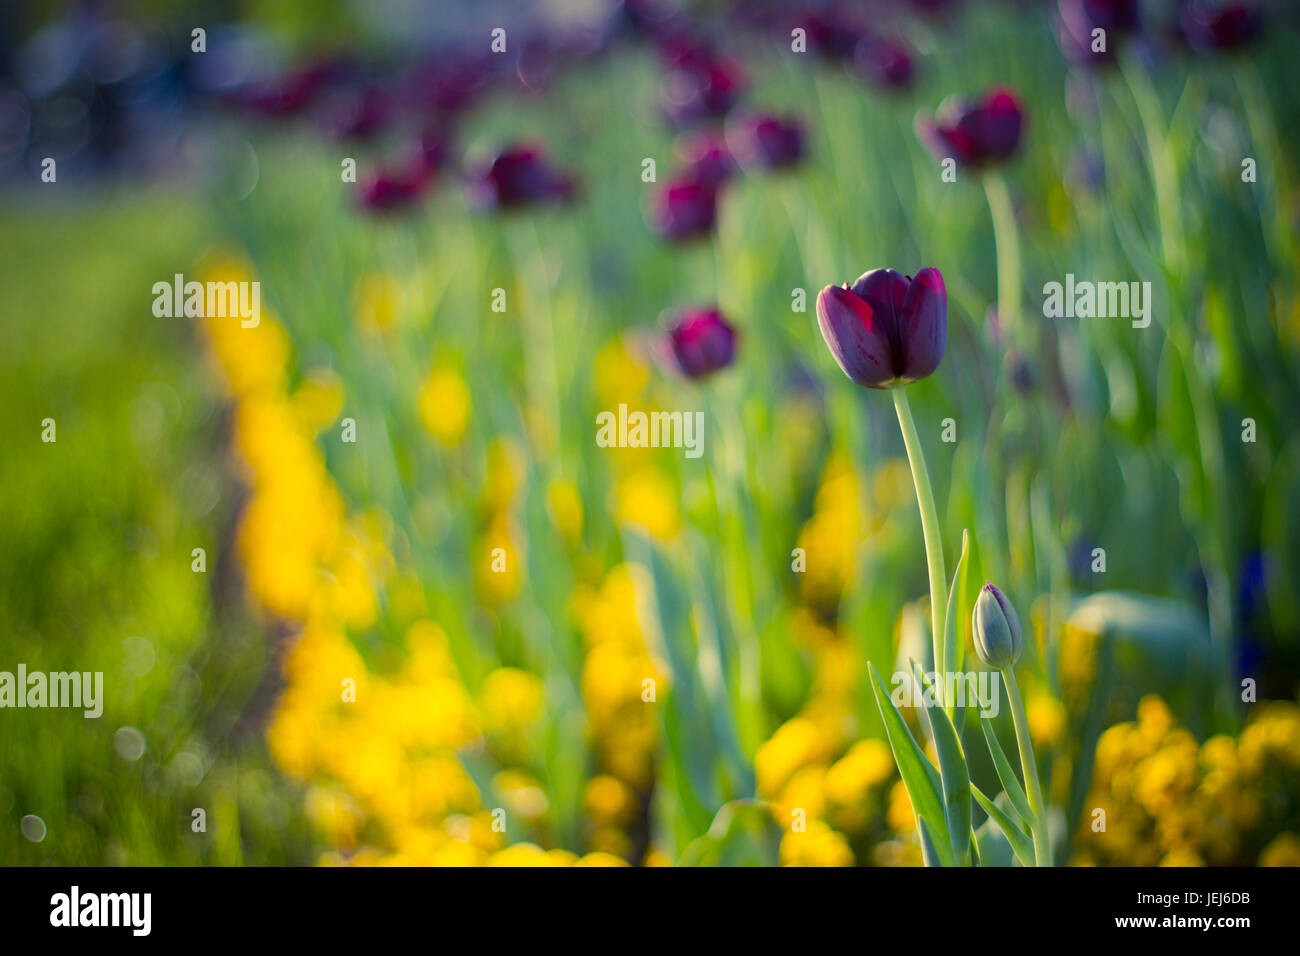 Amazing summer nature flowers, pink tulips and sunlight day landscape. Natural view spring summer flower blooming in the garden green grass background Stock Photo